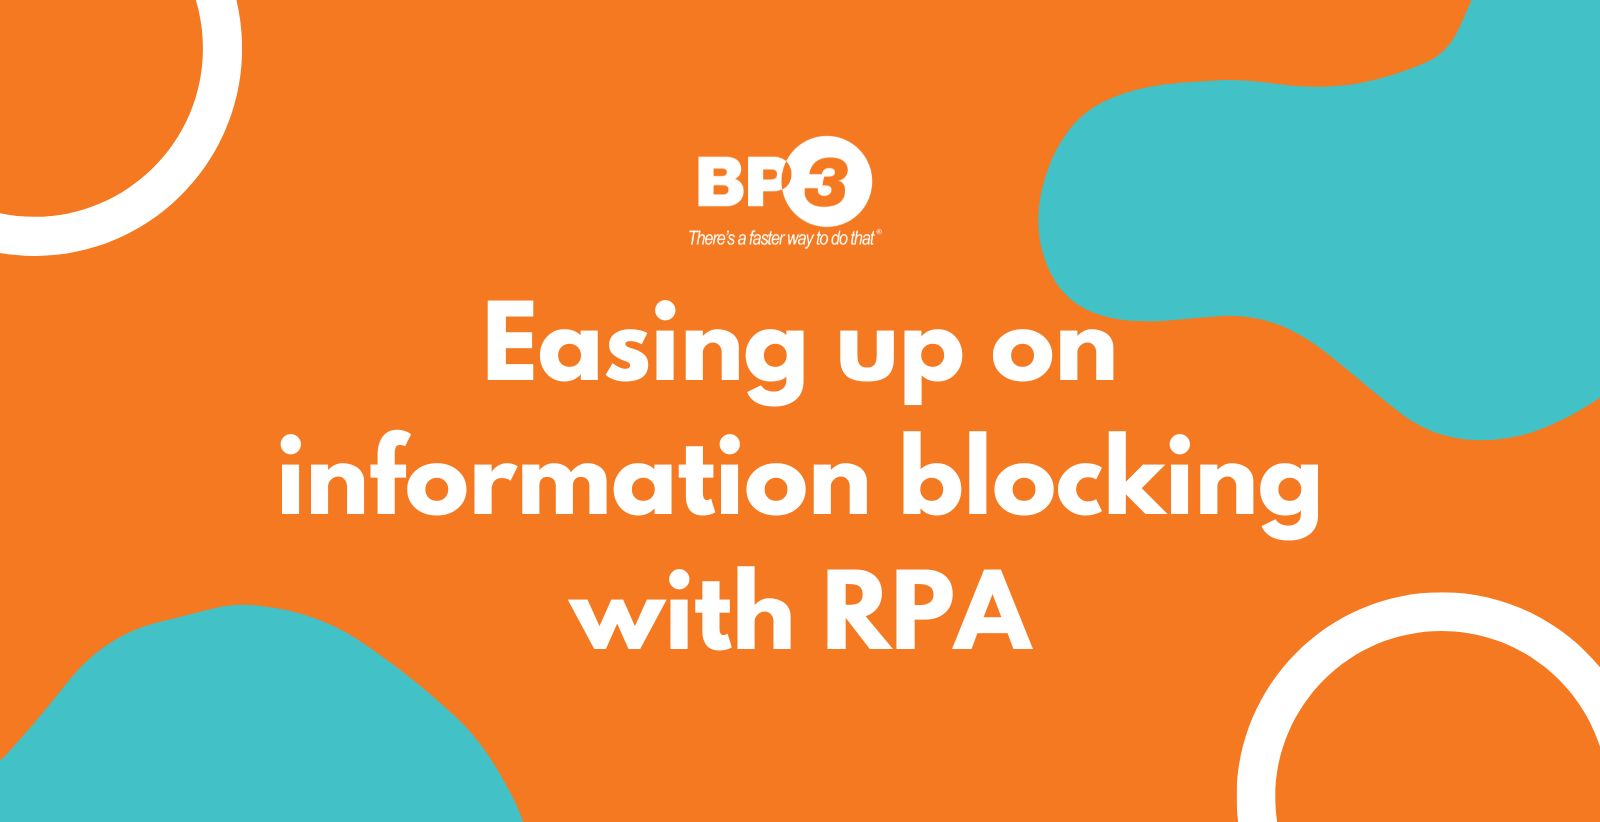 Easing Up on Information Blocking with RPA